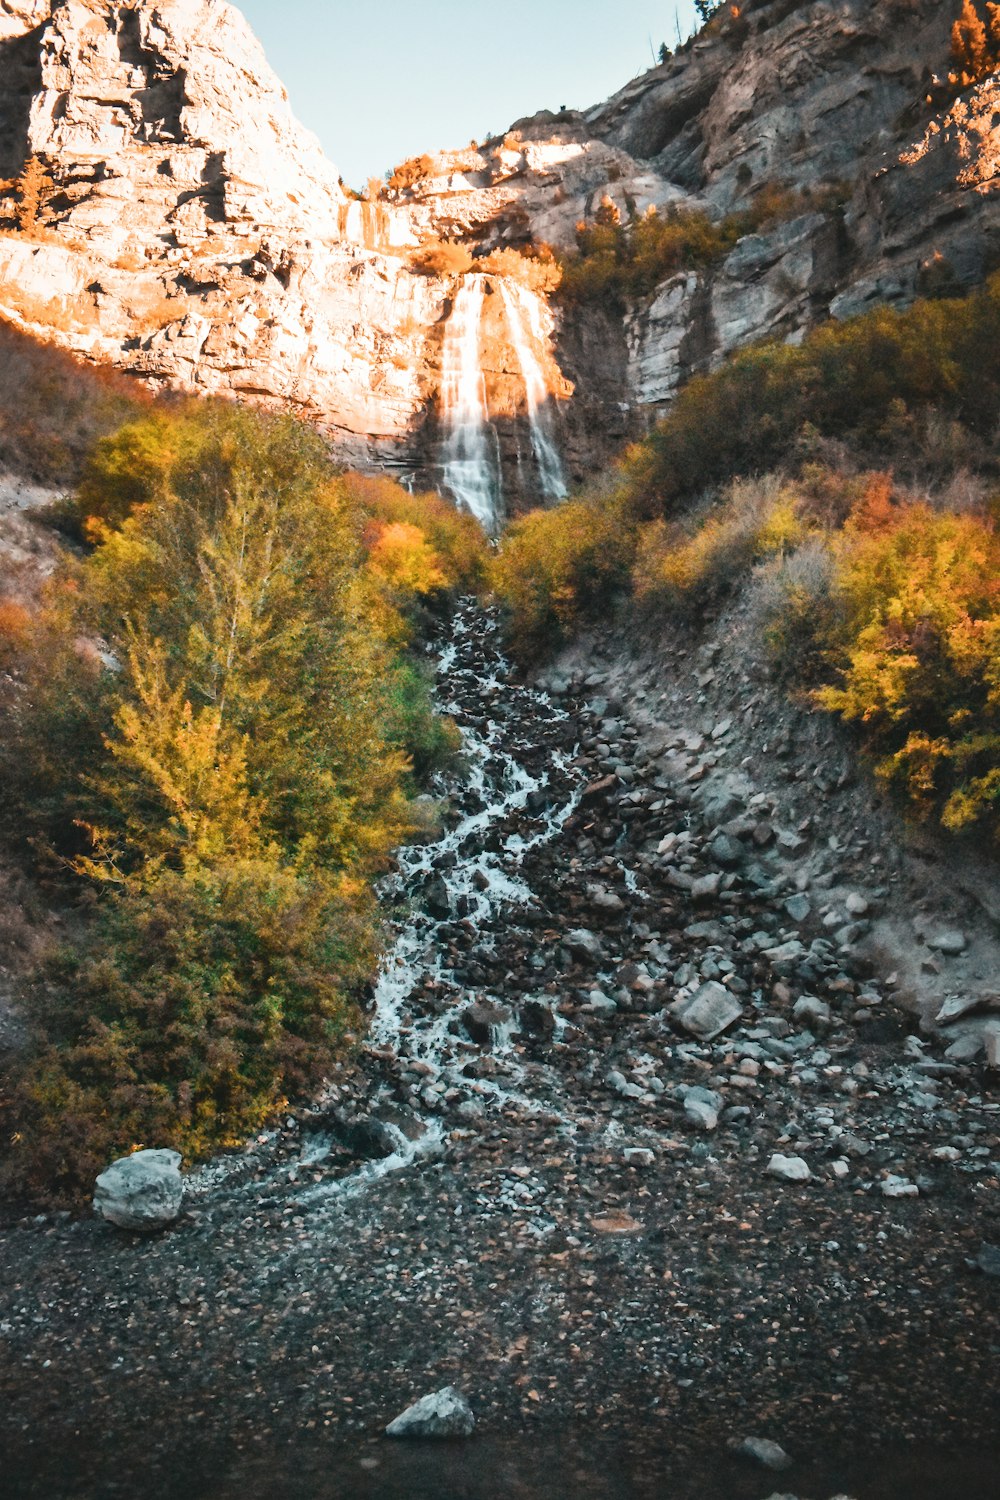 a rocky mountain with a waterfall in the background